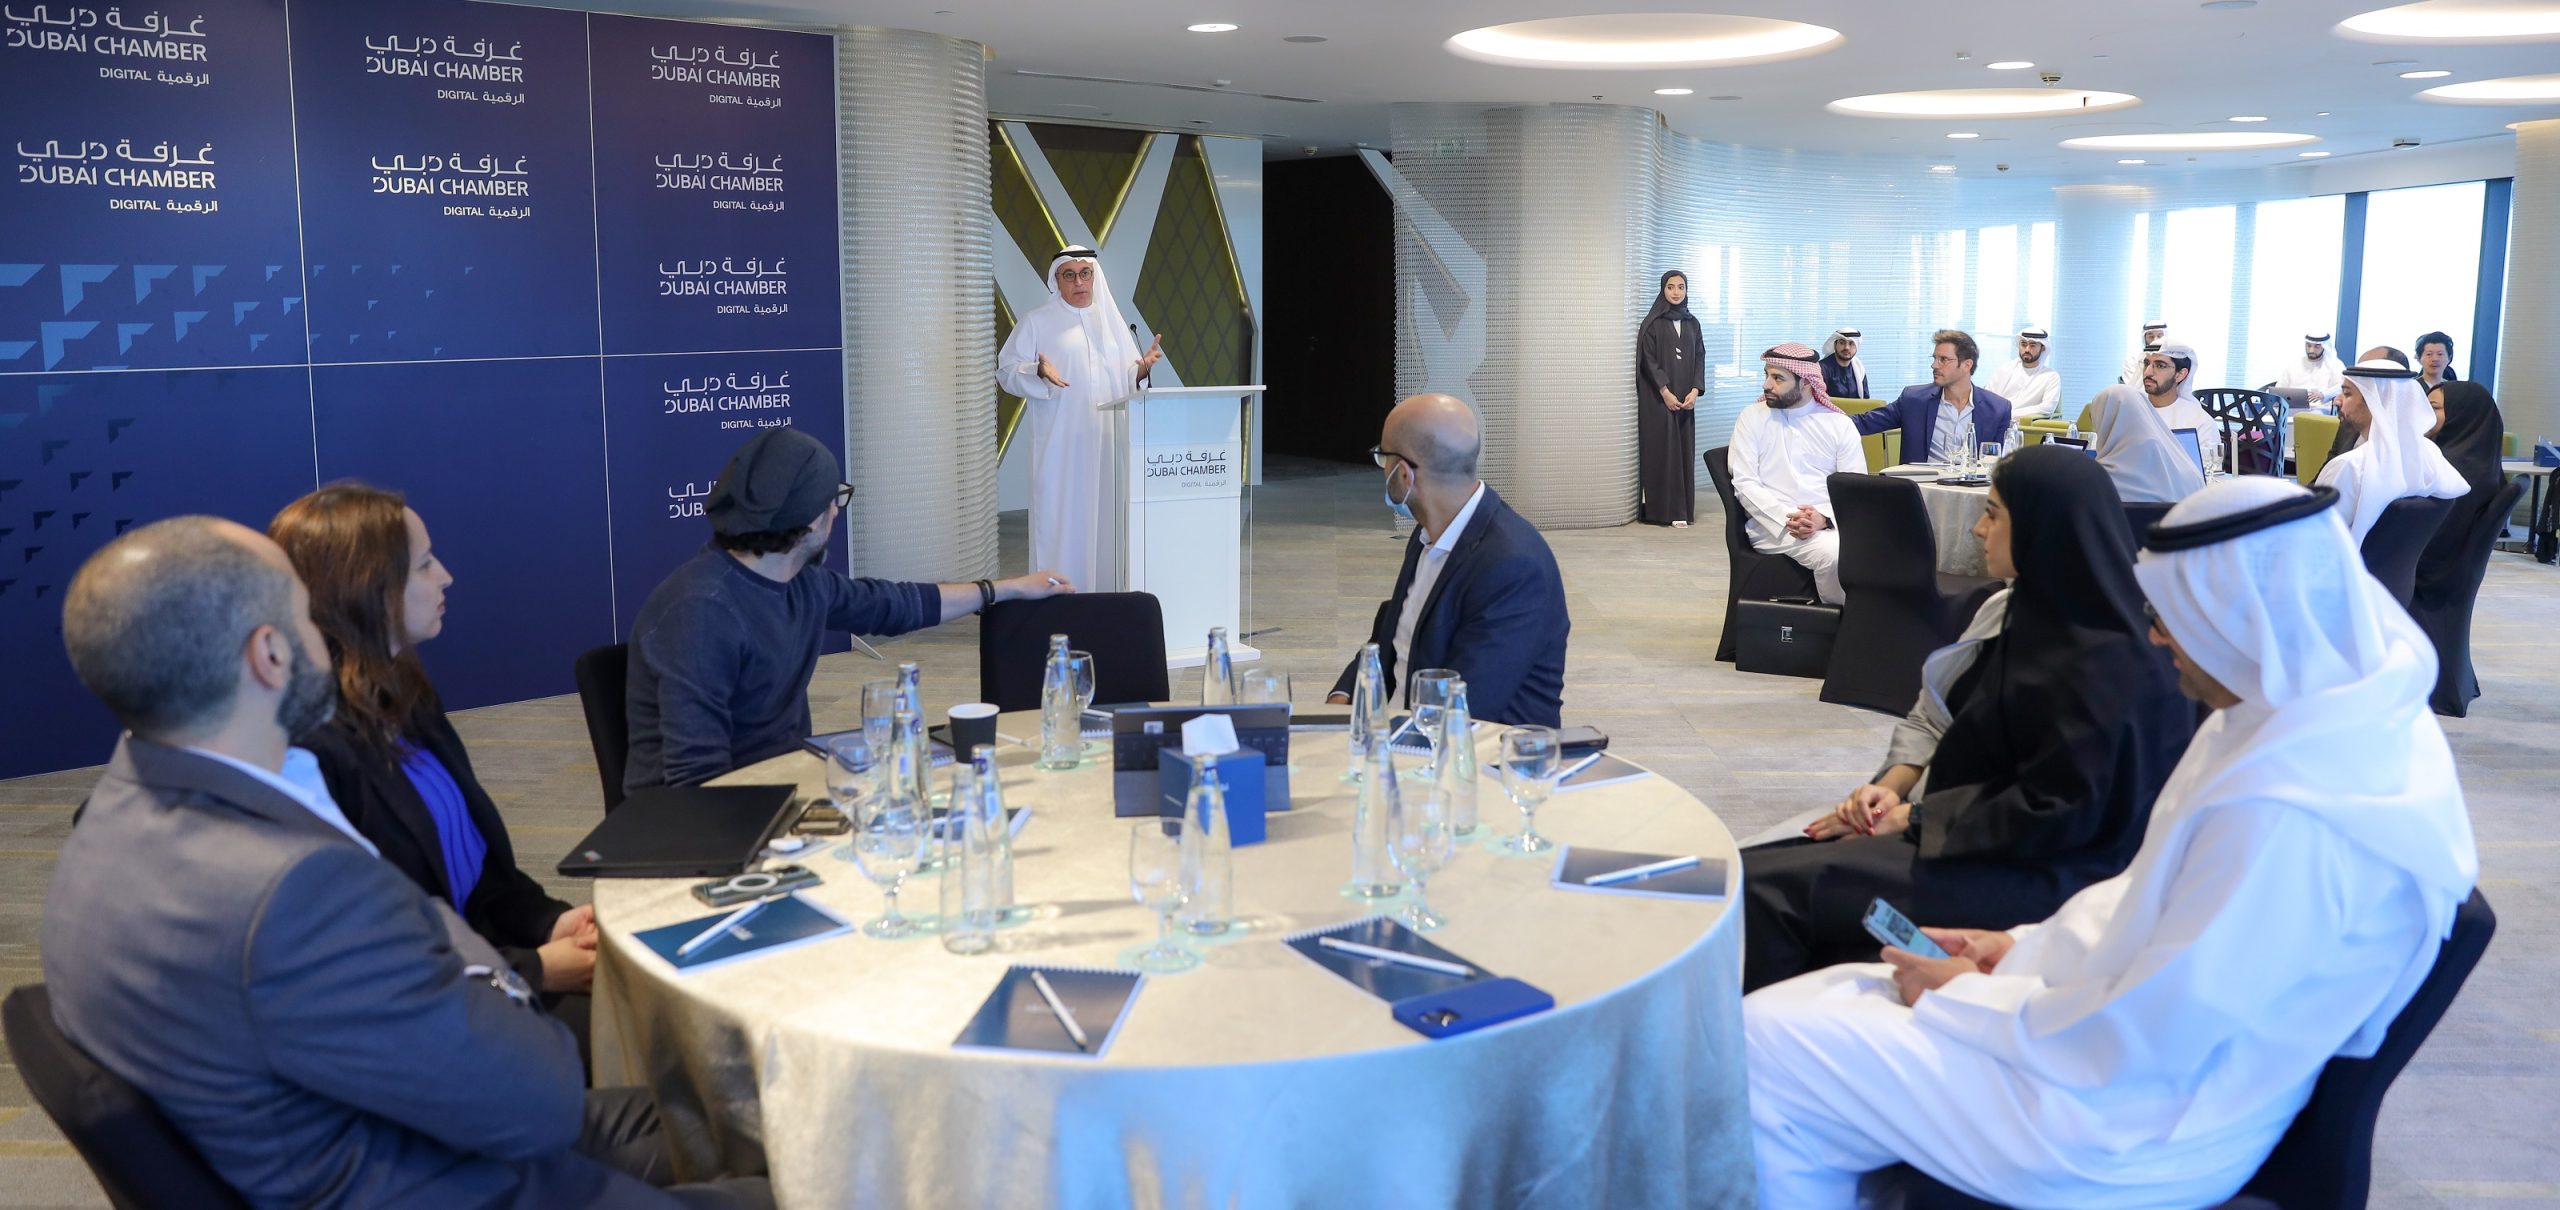 Dubai Chamber of Digital Economy holds workshop to discuss future trends and best practices in social media